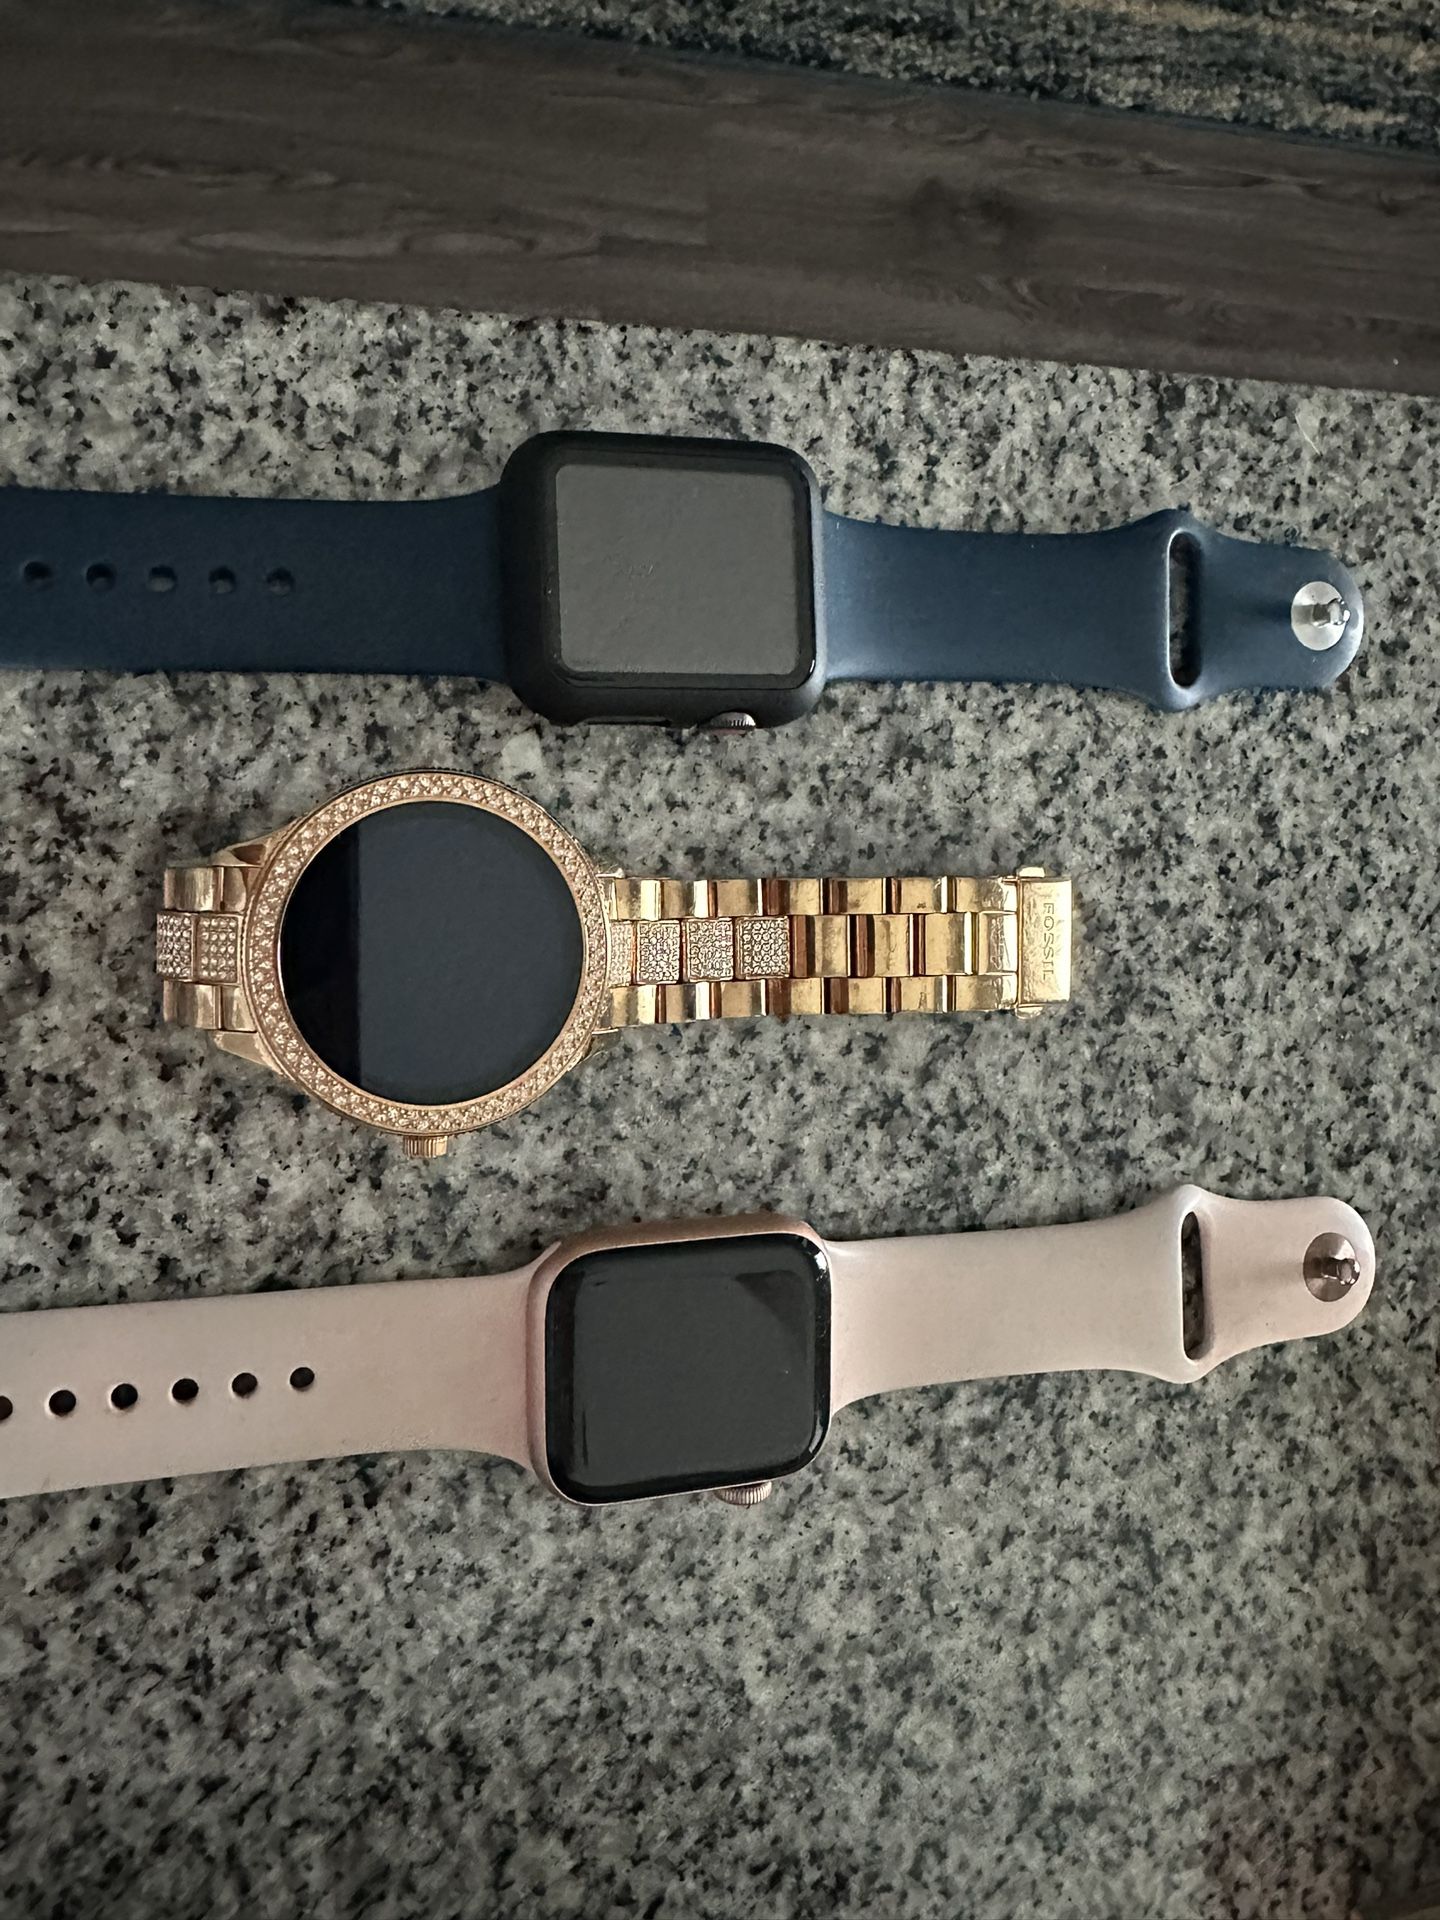 Apple Watch And Fossil Smart Watch